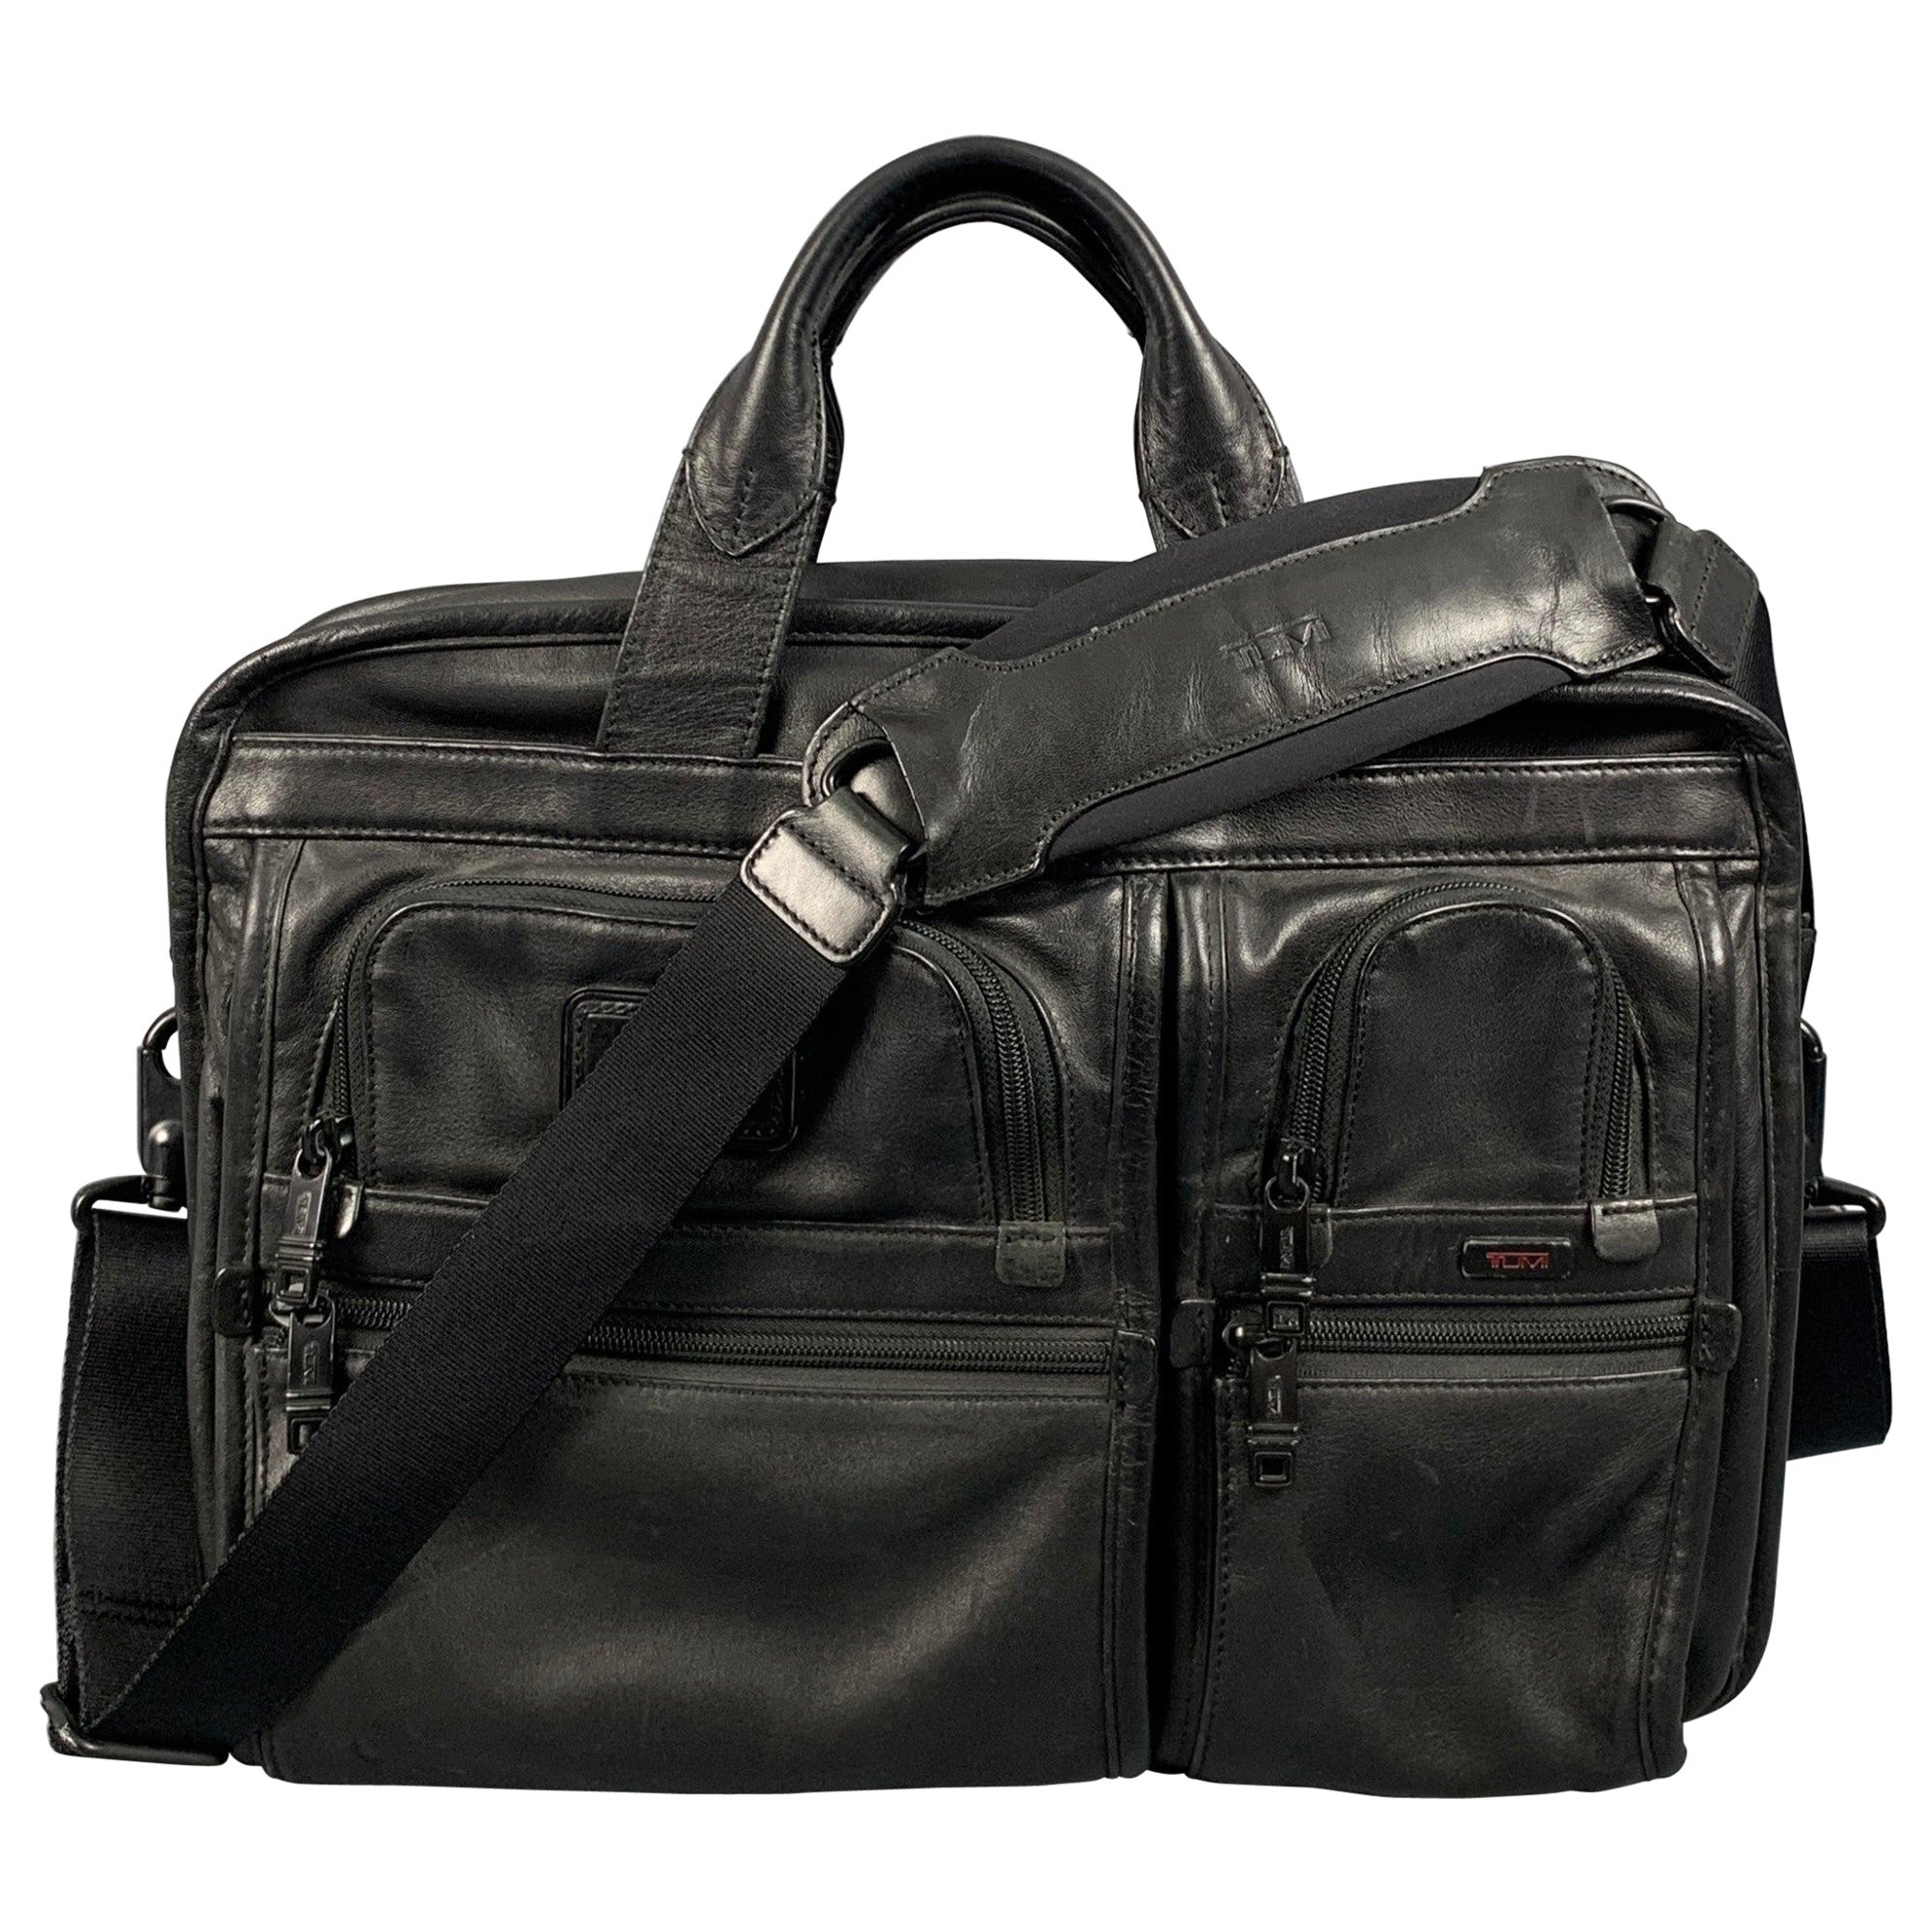 TUMI Grey Leather Briefcase Bag For Sale